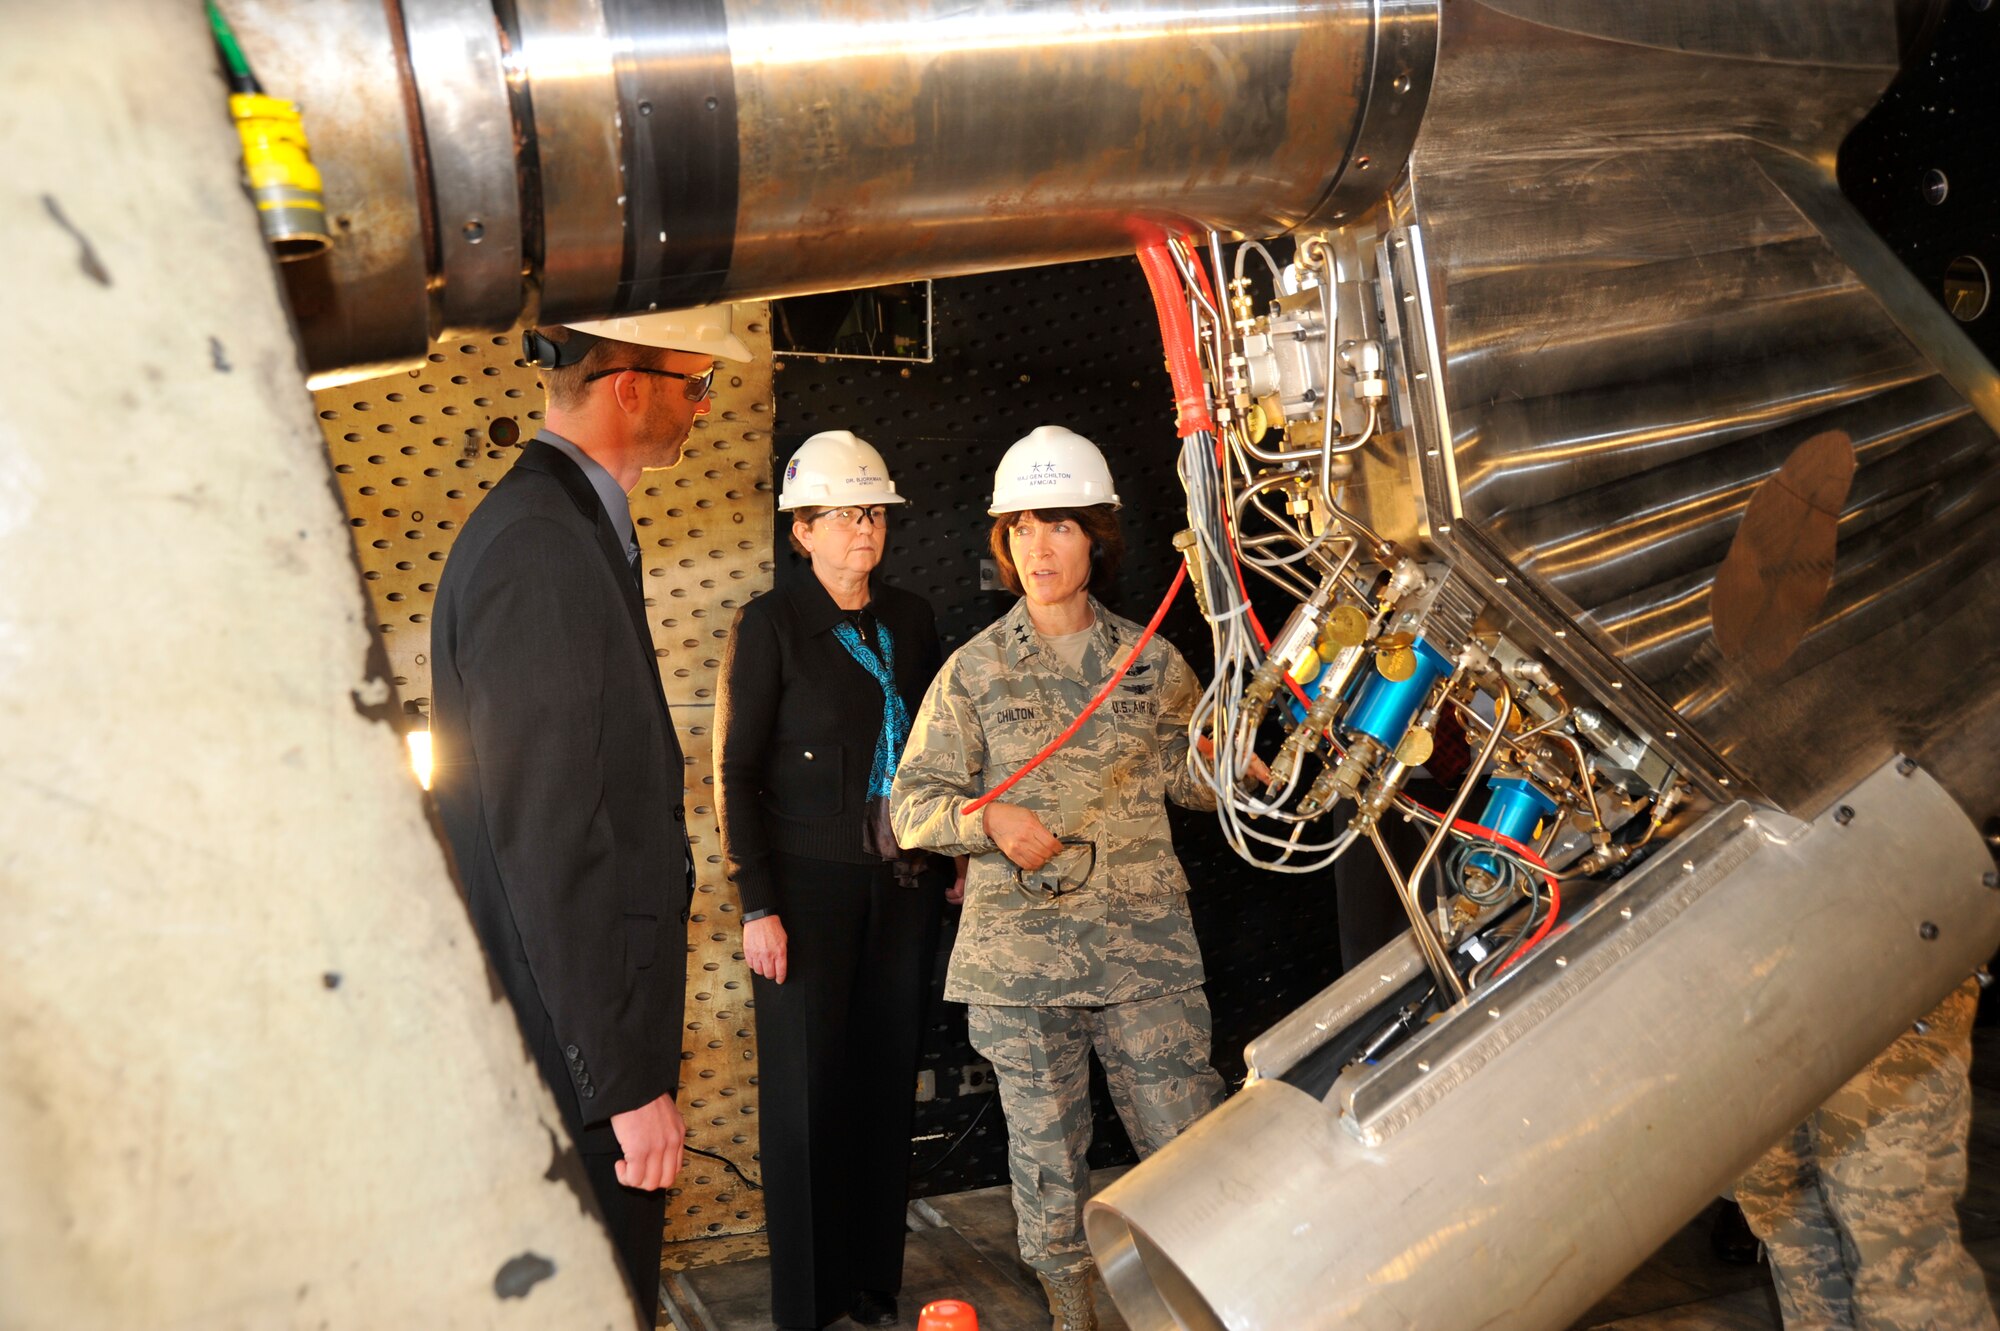 Maj. Gen. Catherine Chilton (right), Air Force Materiel Command Air, Space and Information Operations (AFMC/A3) director, discusses the operation of the Propulsion Wind Tunnel (PWT) Wings Level Yaw (WLY) apparatus with AEDC Senior Acquisition Program Manager Elijah Minter (left) during a tour of the Complex on March 18. The WLY provides quality data and an increased yaw range capability during aerodynamic testing. Dr. Eileen Bjorkman, a member of the Senior Executive Service and AFMC/A3 deputy, is also pictured attending the tour. (Photo by Rick Goodfriend)